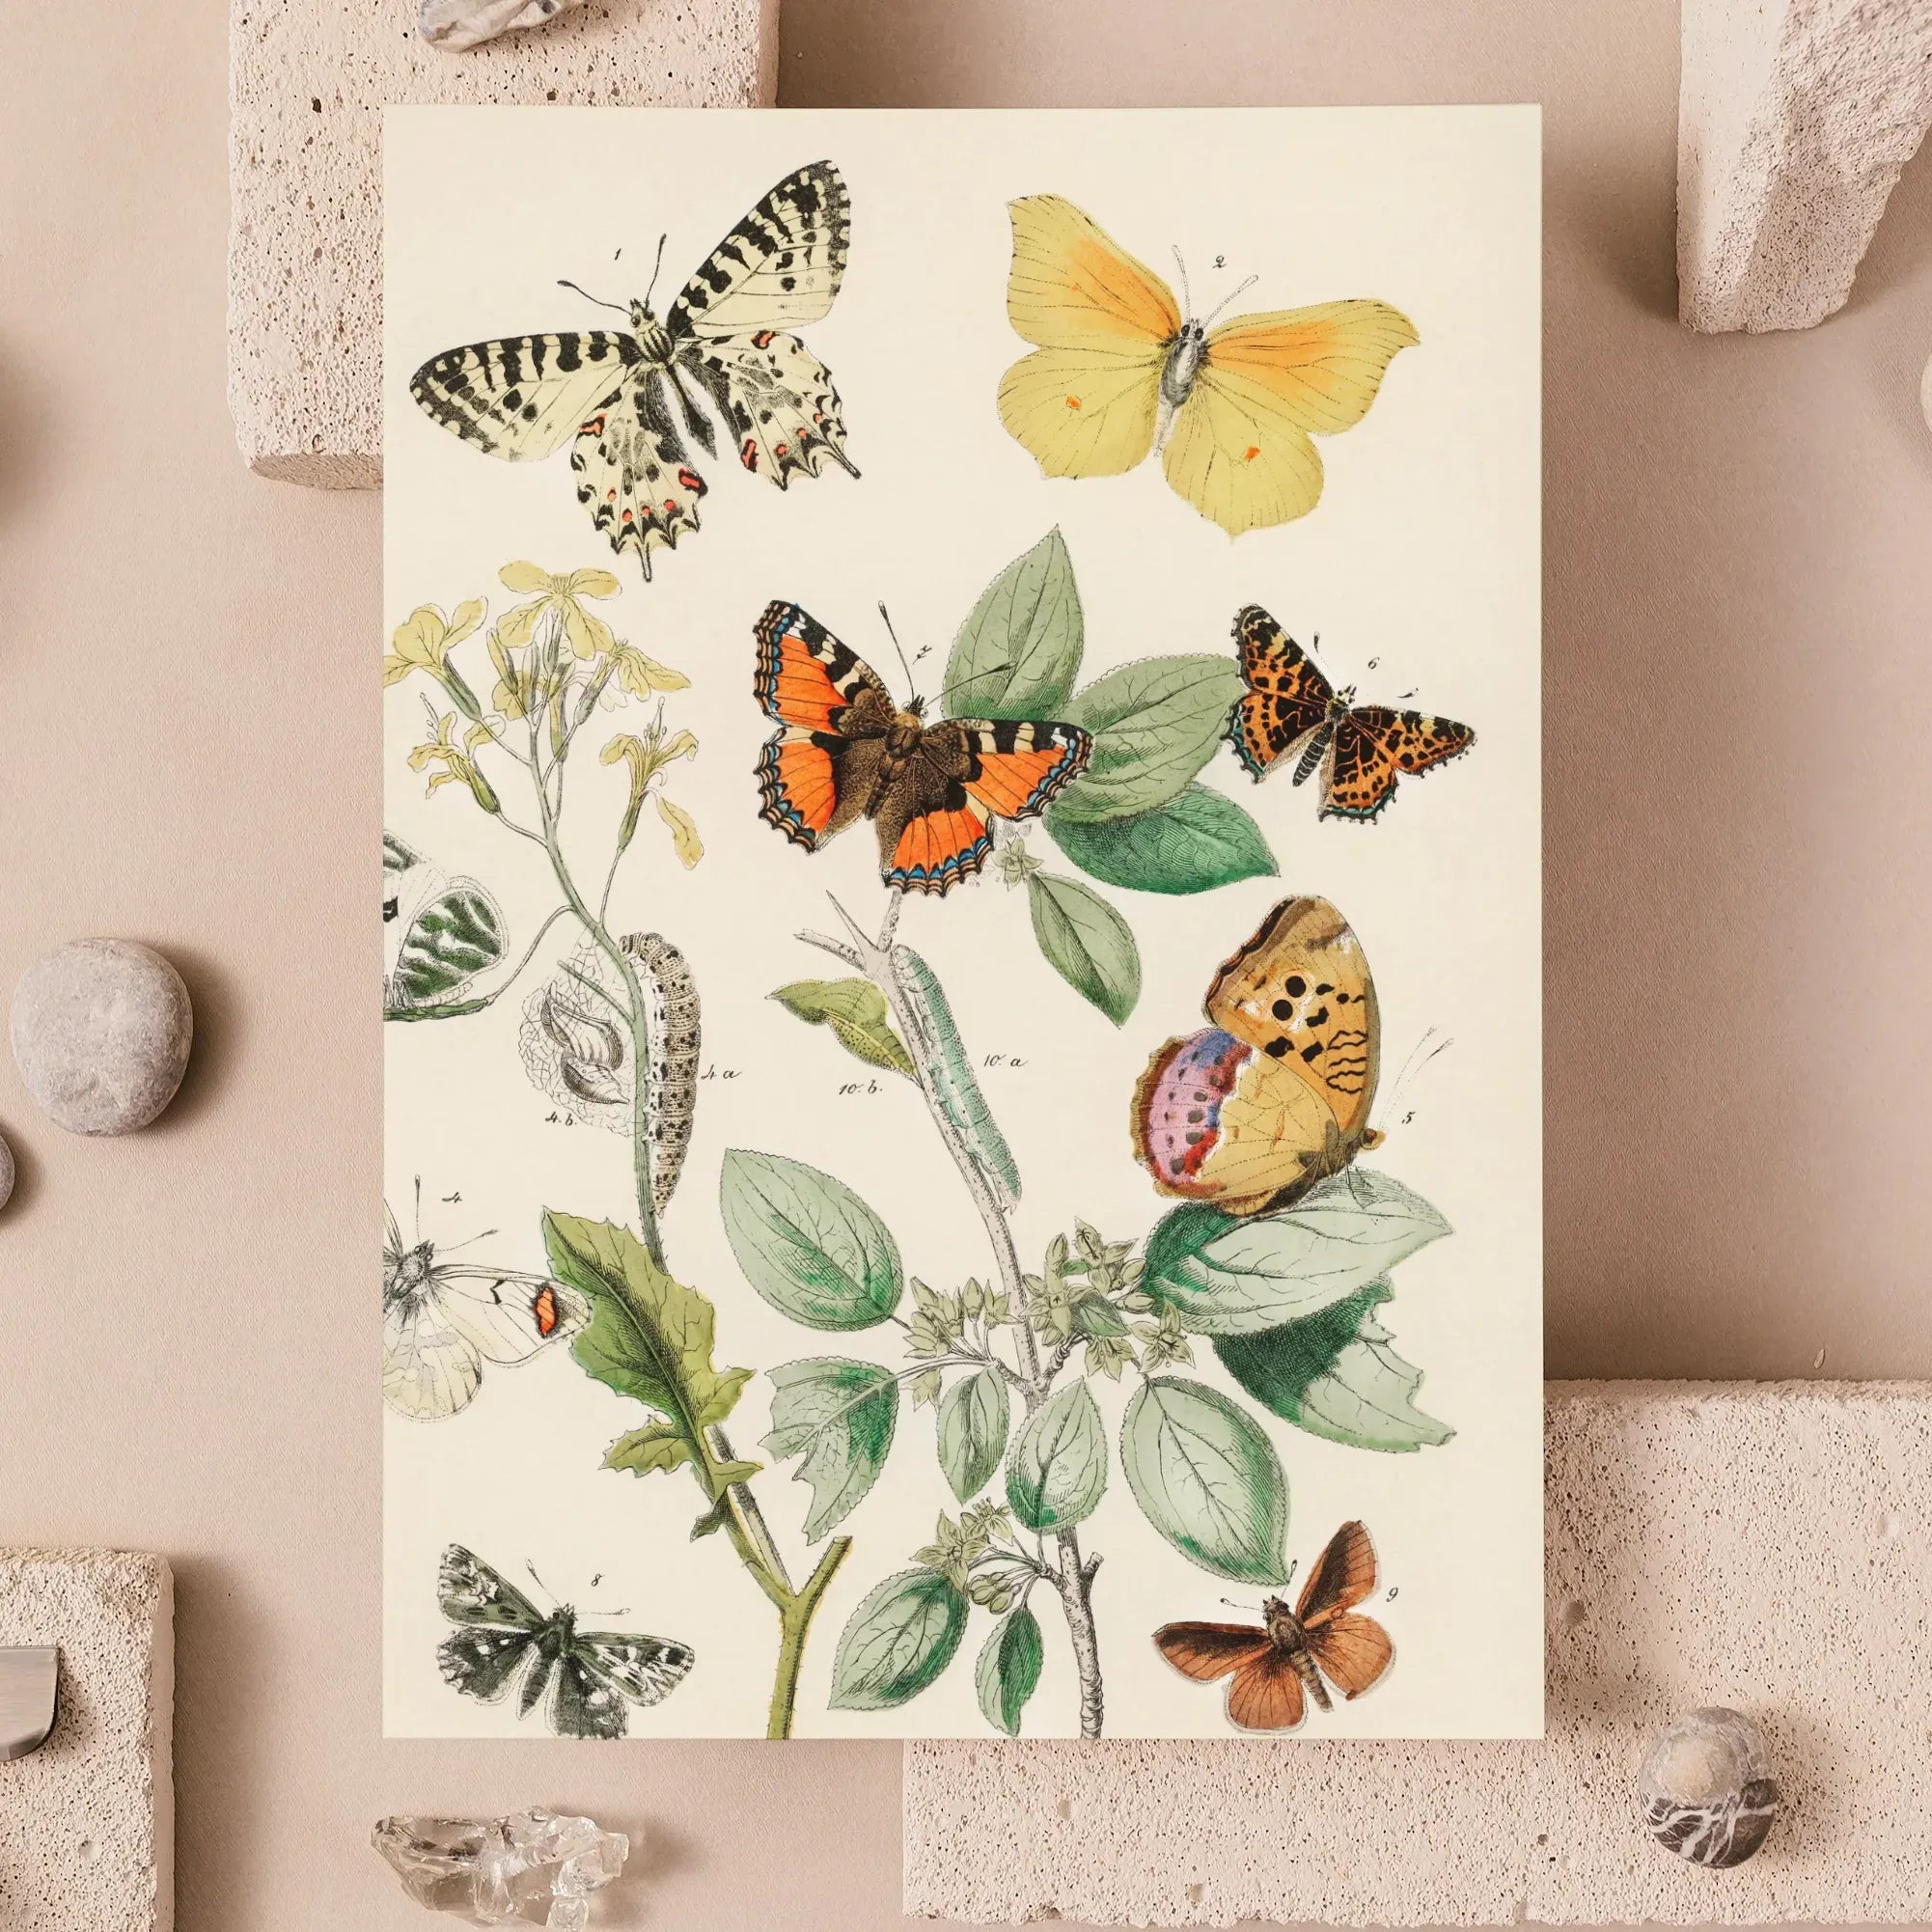 European Butterflies And Moths 3 - William Forsell Kirby Greeting Card - Greeting & Note Cards - Aesthetic Art